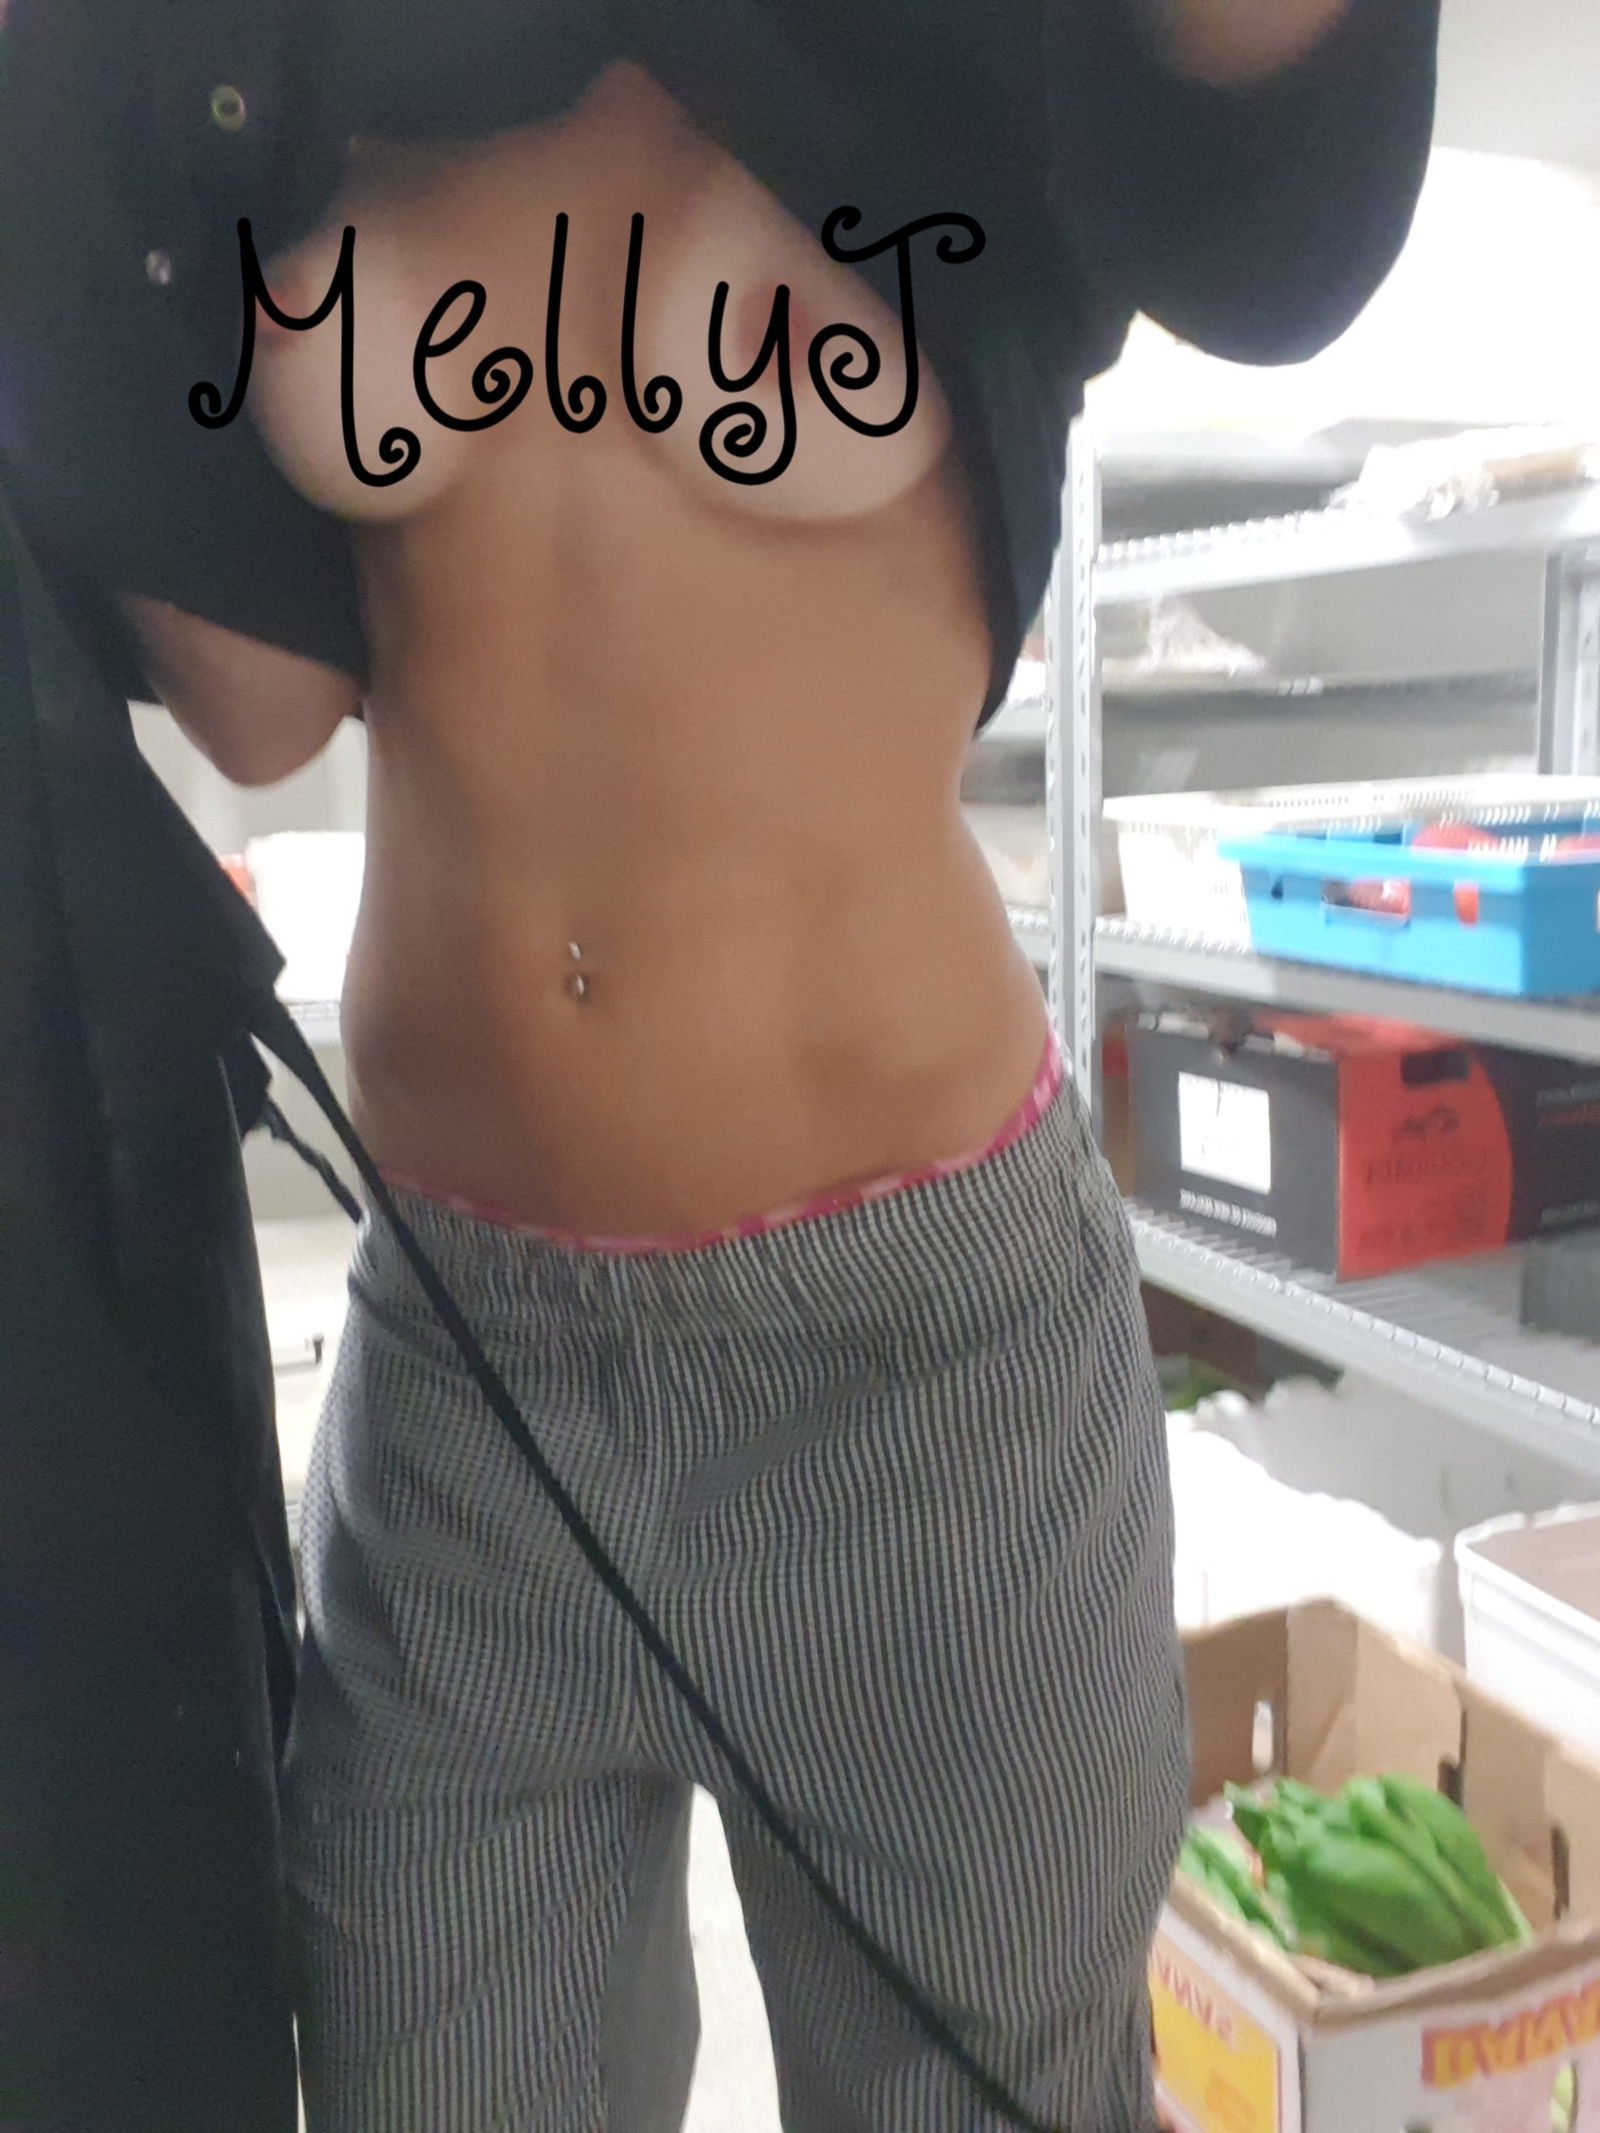 Photo by Melly.j with the username @Melly.j, who is a star user,  April 3, 2020 at 8:16 AM and the text says 'Unfortunately, due to the virus, I lost my job as a chef 😔
So help support this poor, unemployed chef 😁🙏
Follow me on Onlyfans to see more. 
FREE subscription. 
https://onlyfans.com/hippiechef'